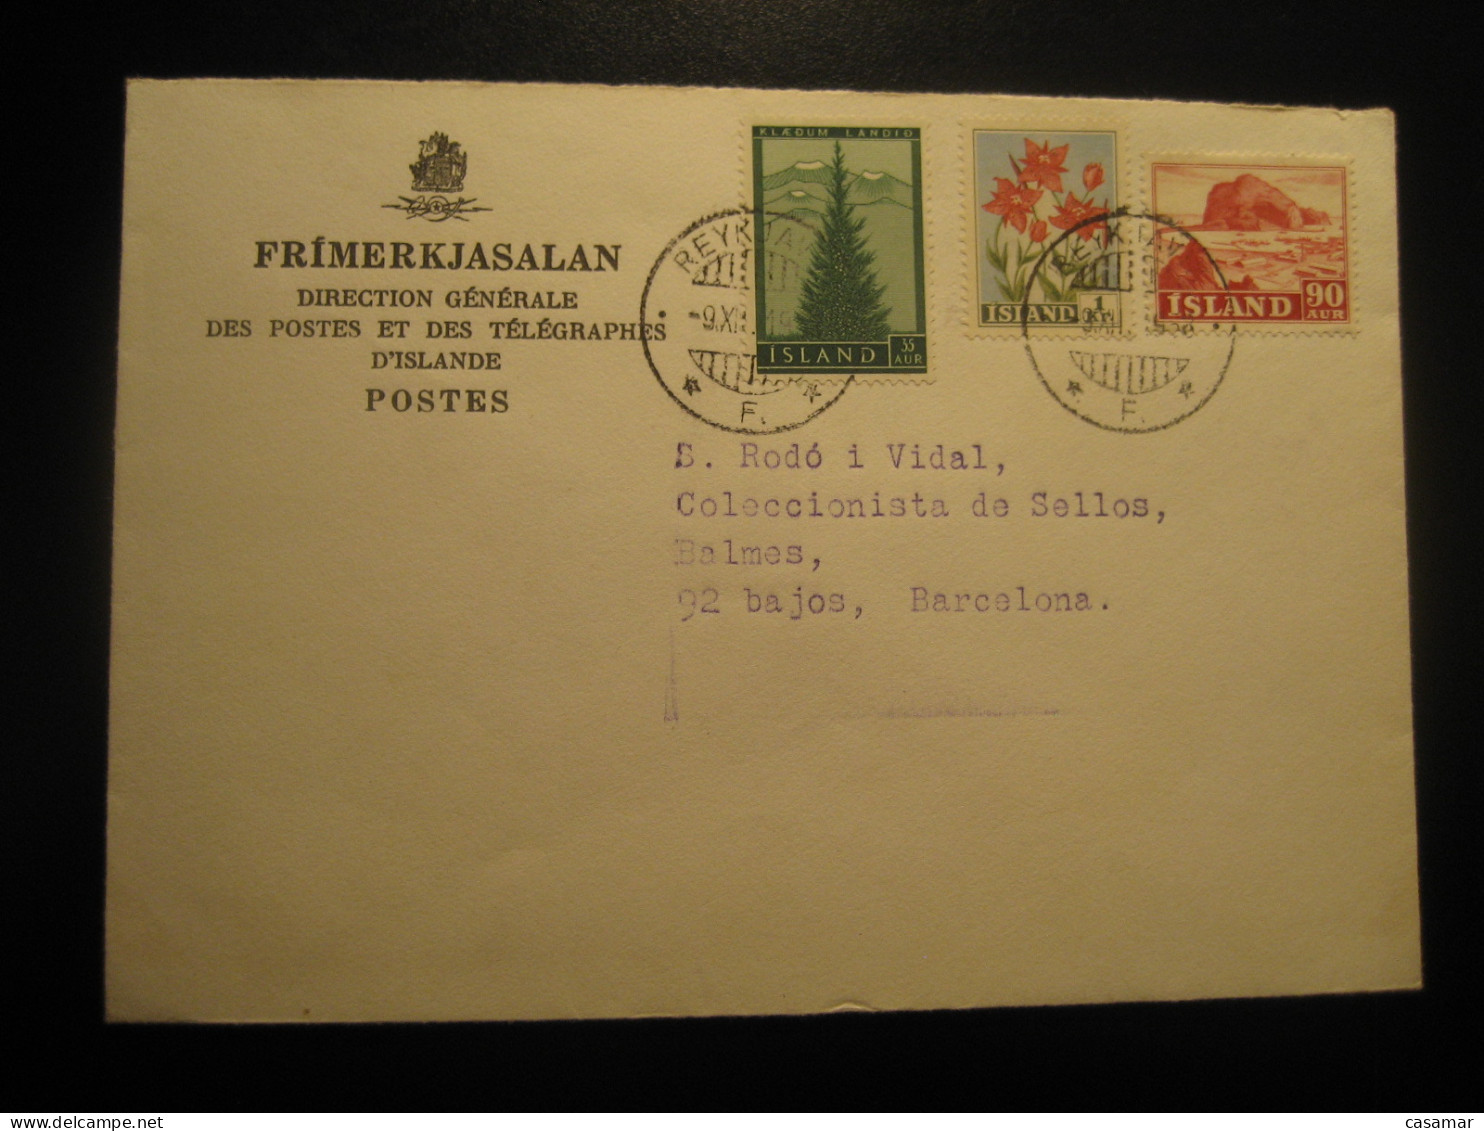 REYKJAVIK 1958 To Spain 3 Stamp On Cancel Cover ICELAND - Covers & Documents